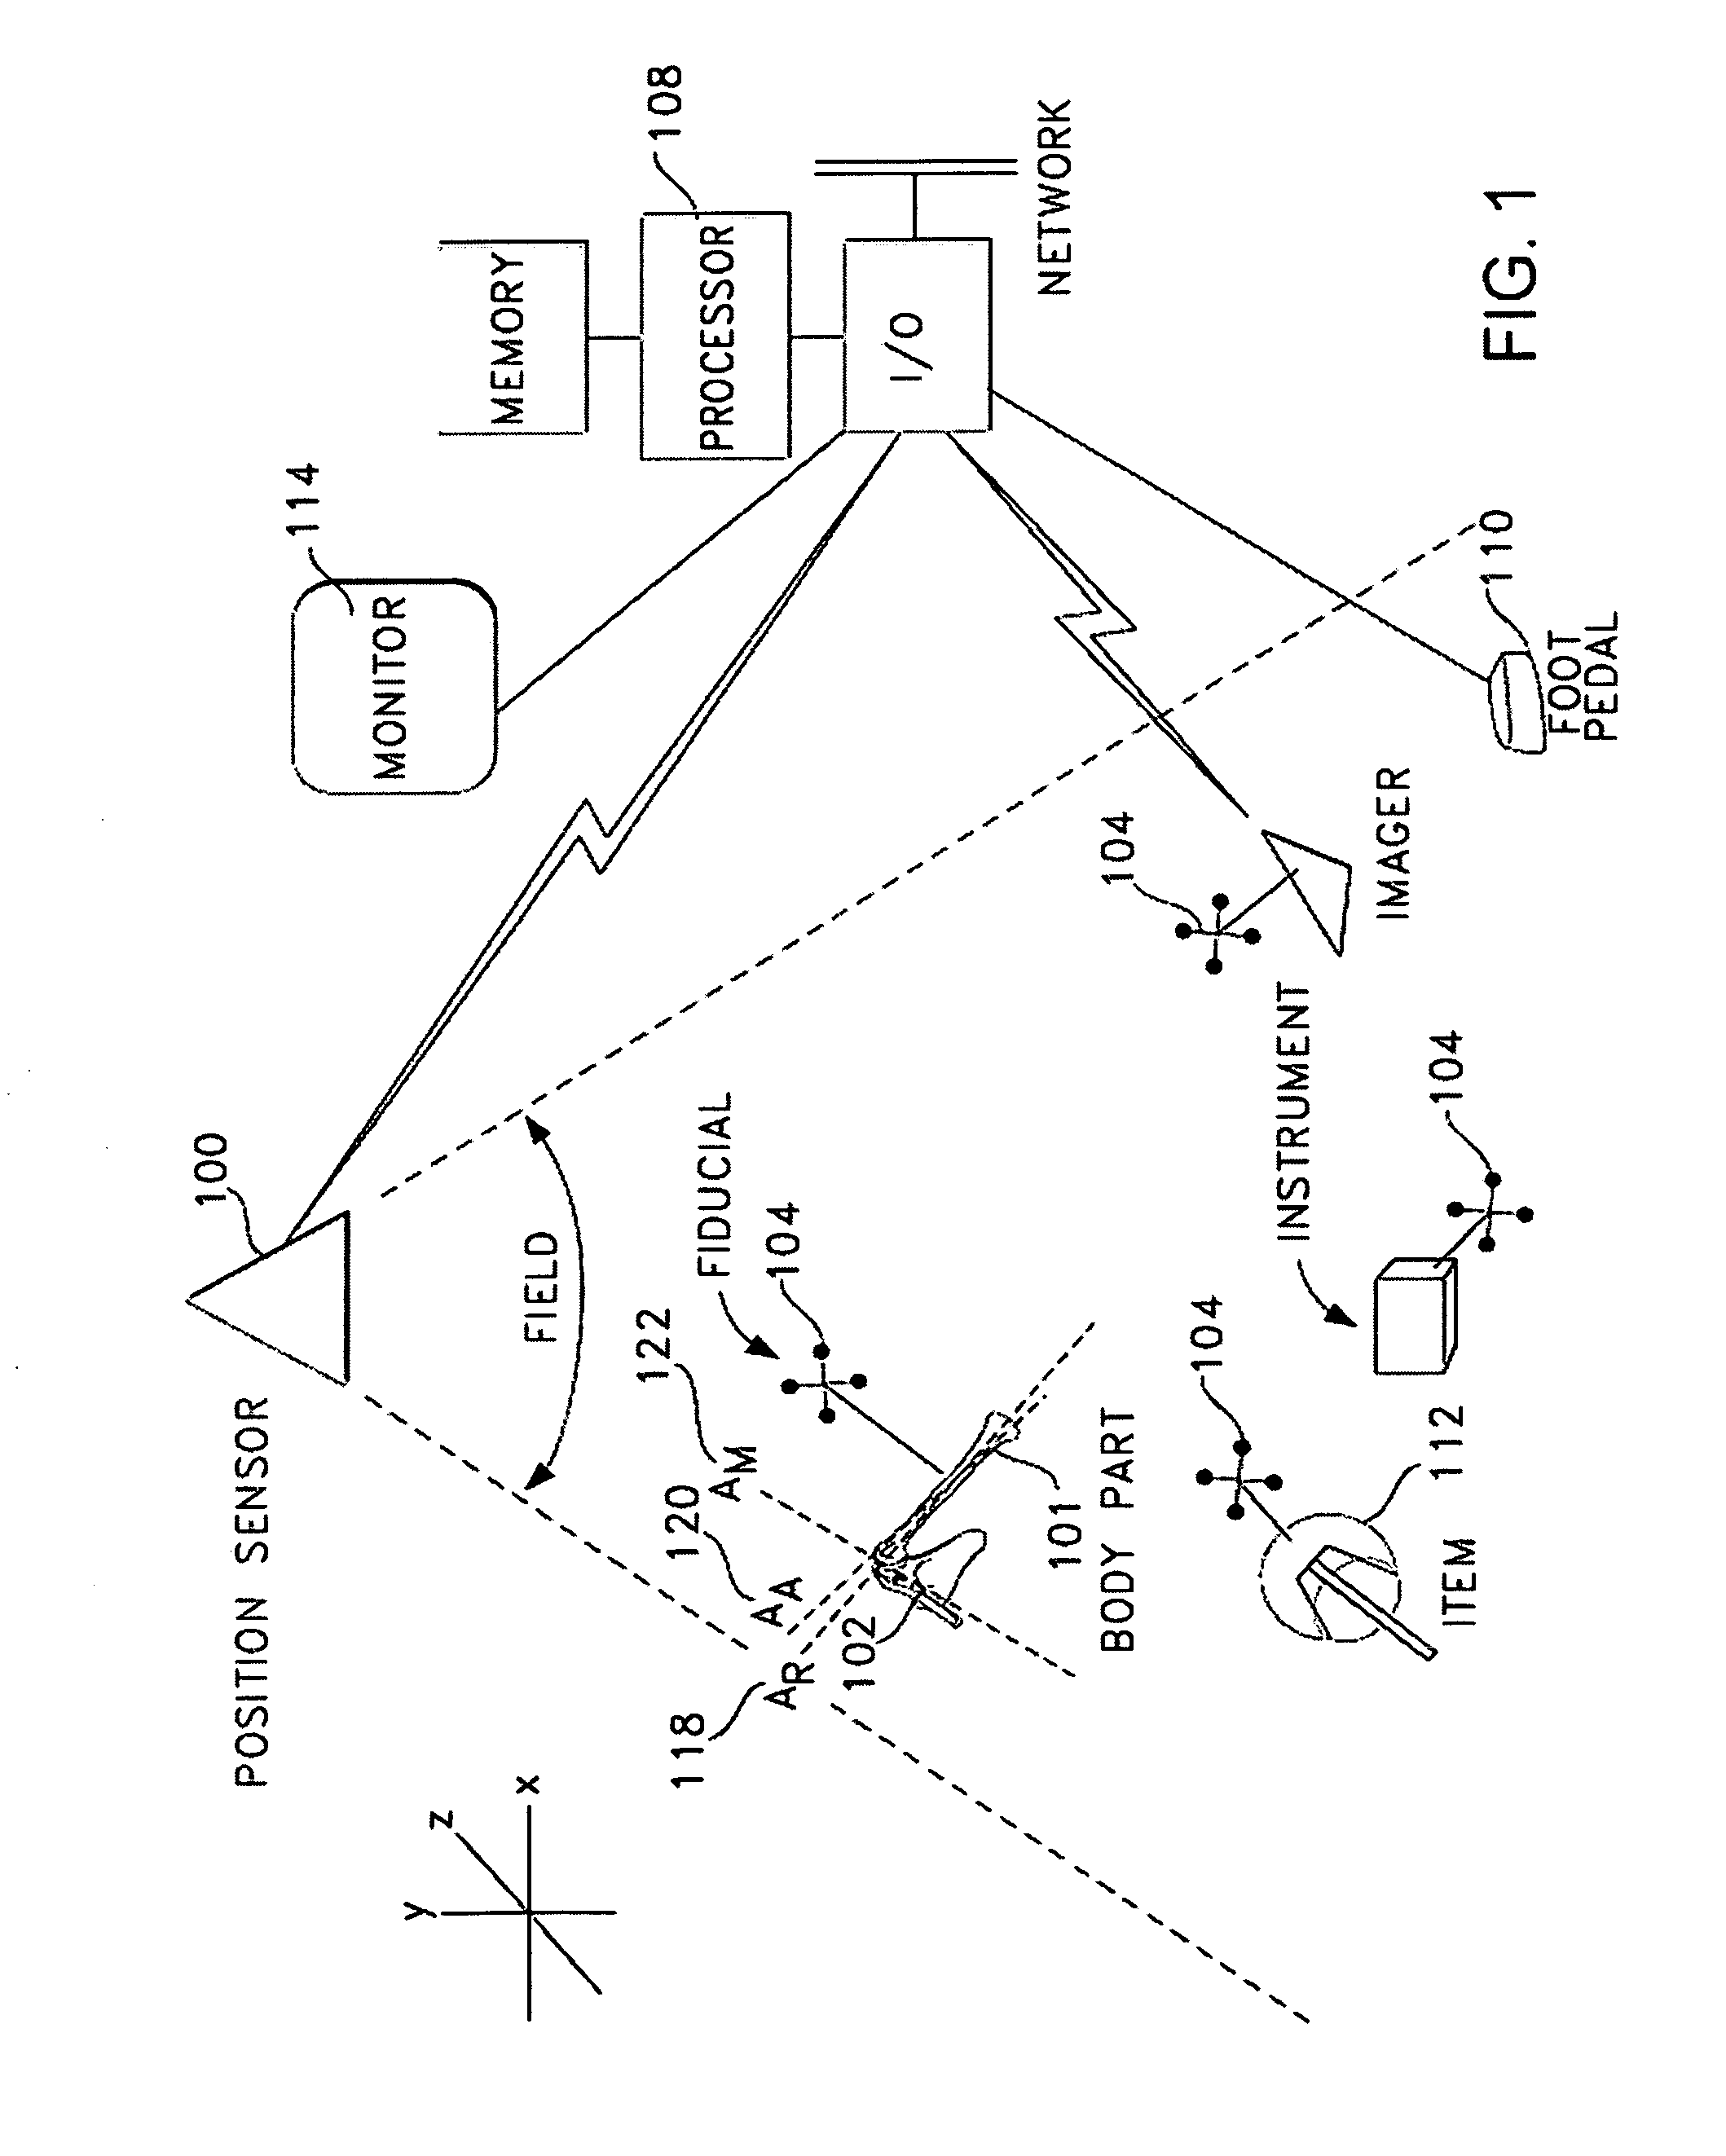 Systems, methods, and apparatus for automatic software flow using instrument detection during computer-aided surgery